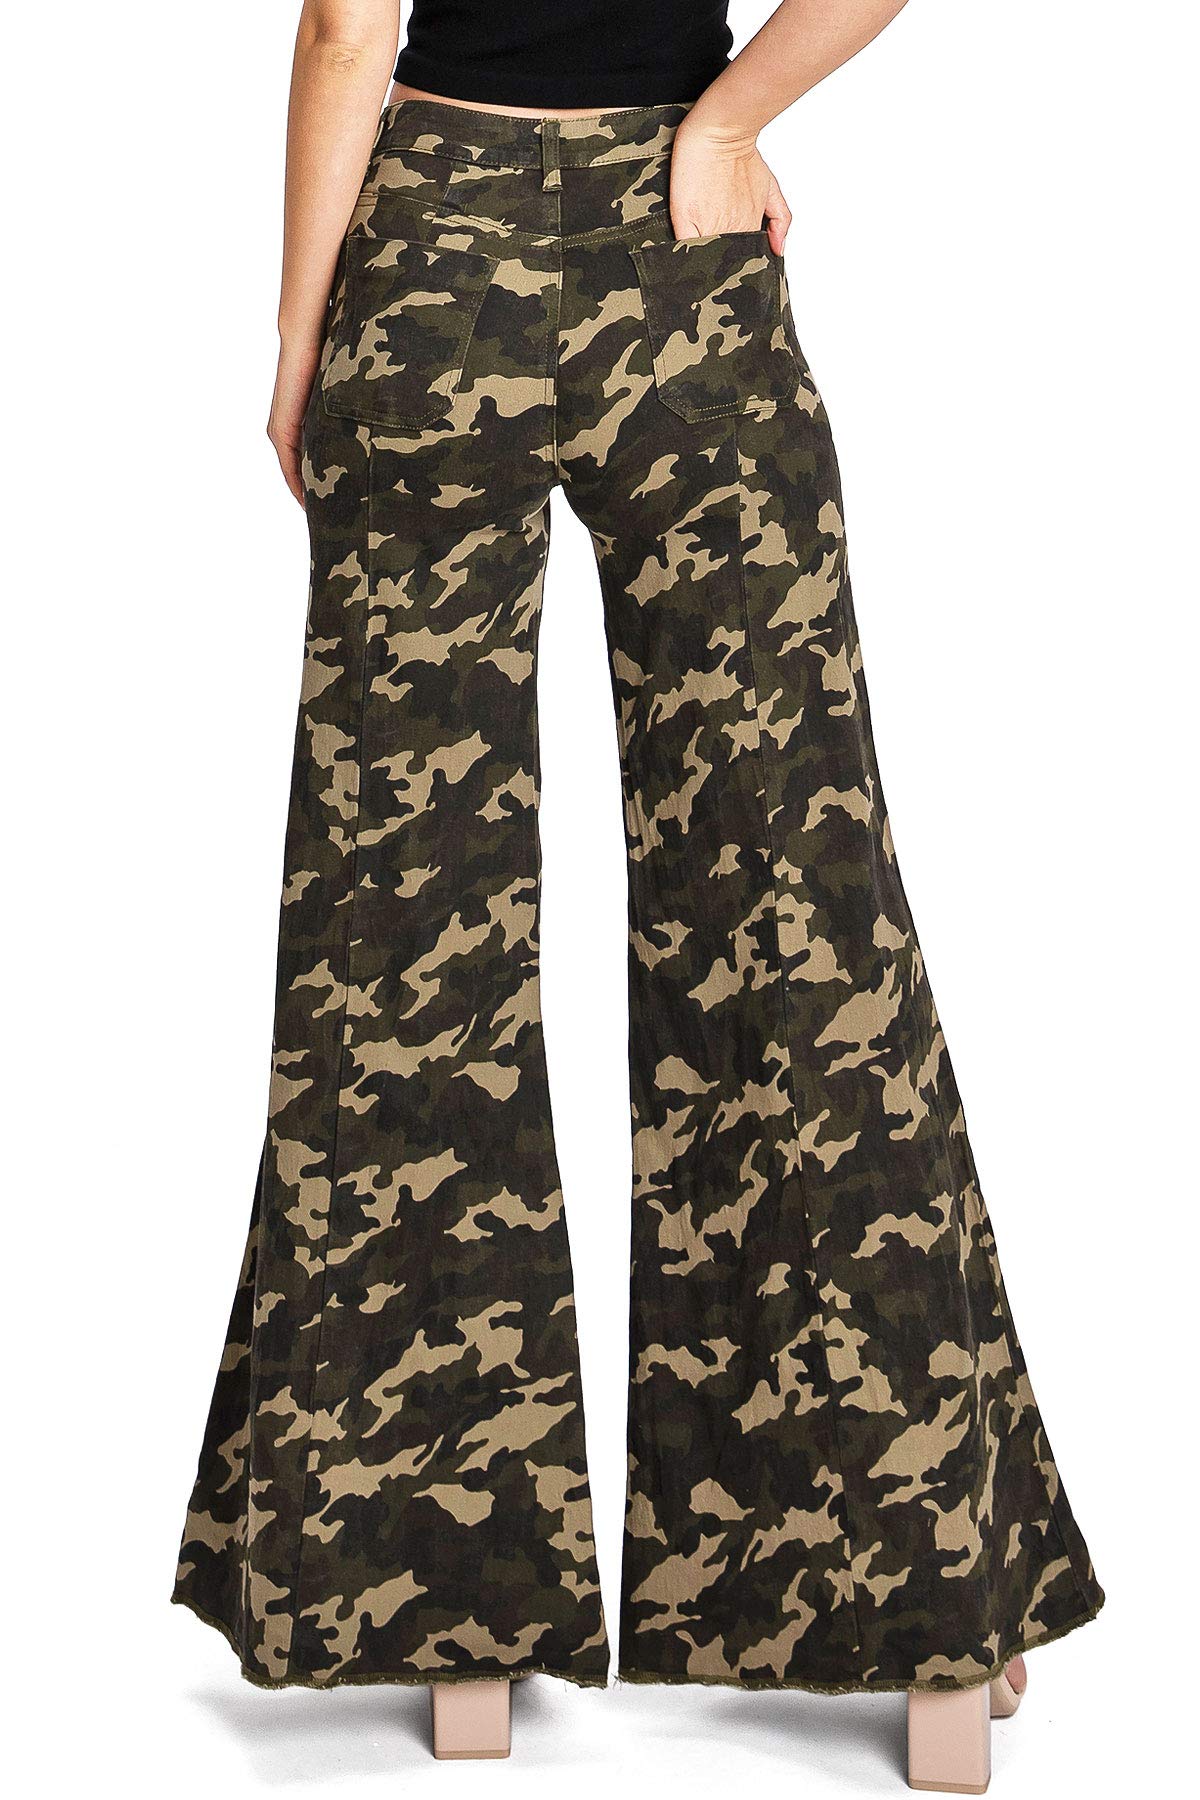 Archive Camo Flares